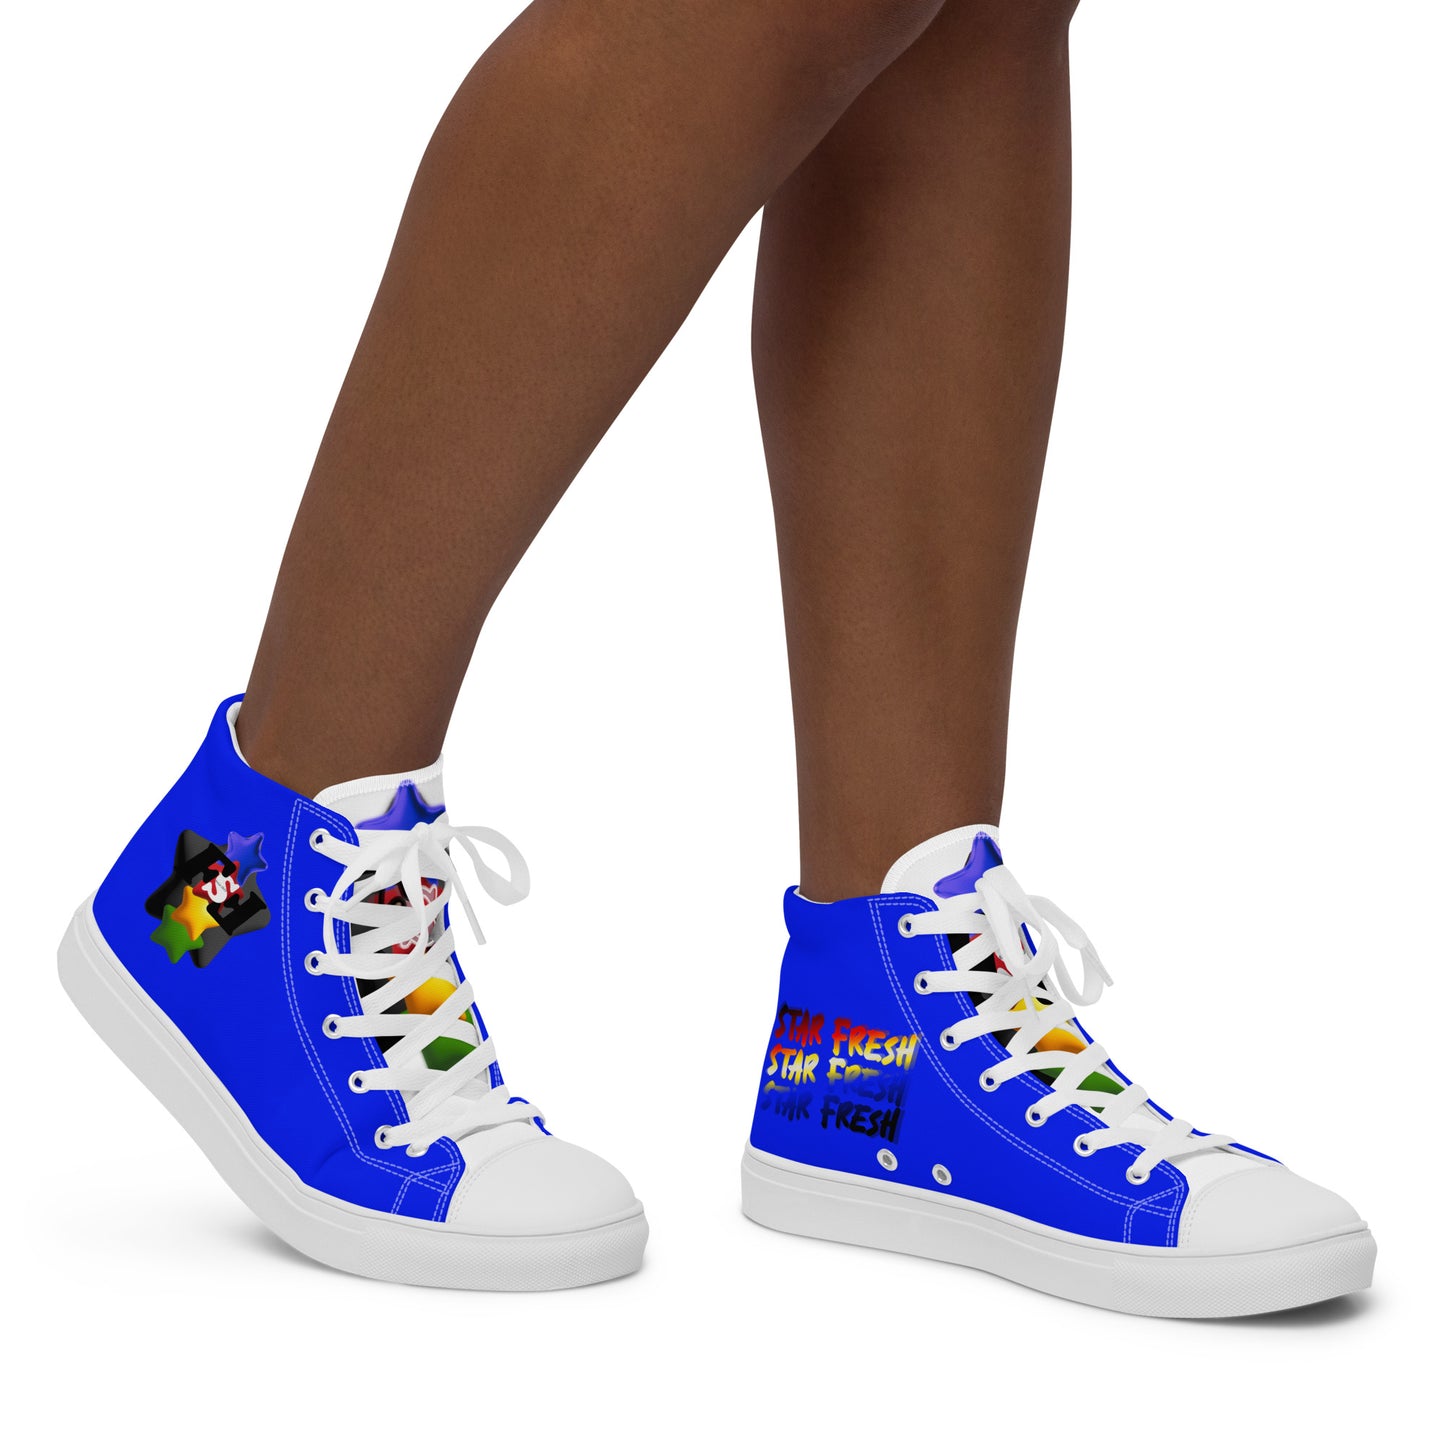 Women’s high top canvas shoes - FSF Stacked 'Black Star' Blue